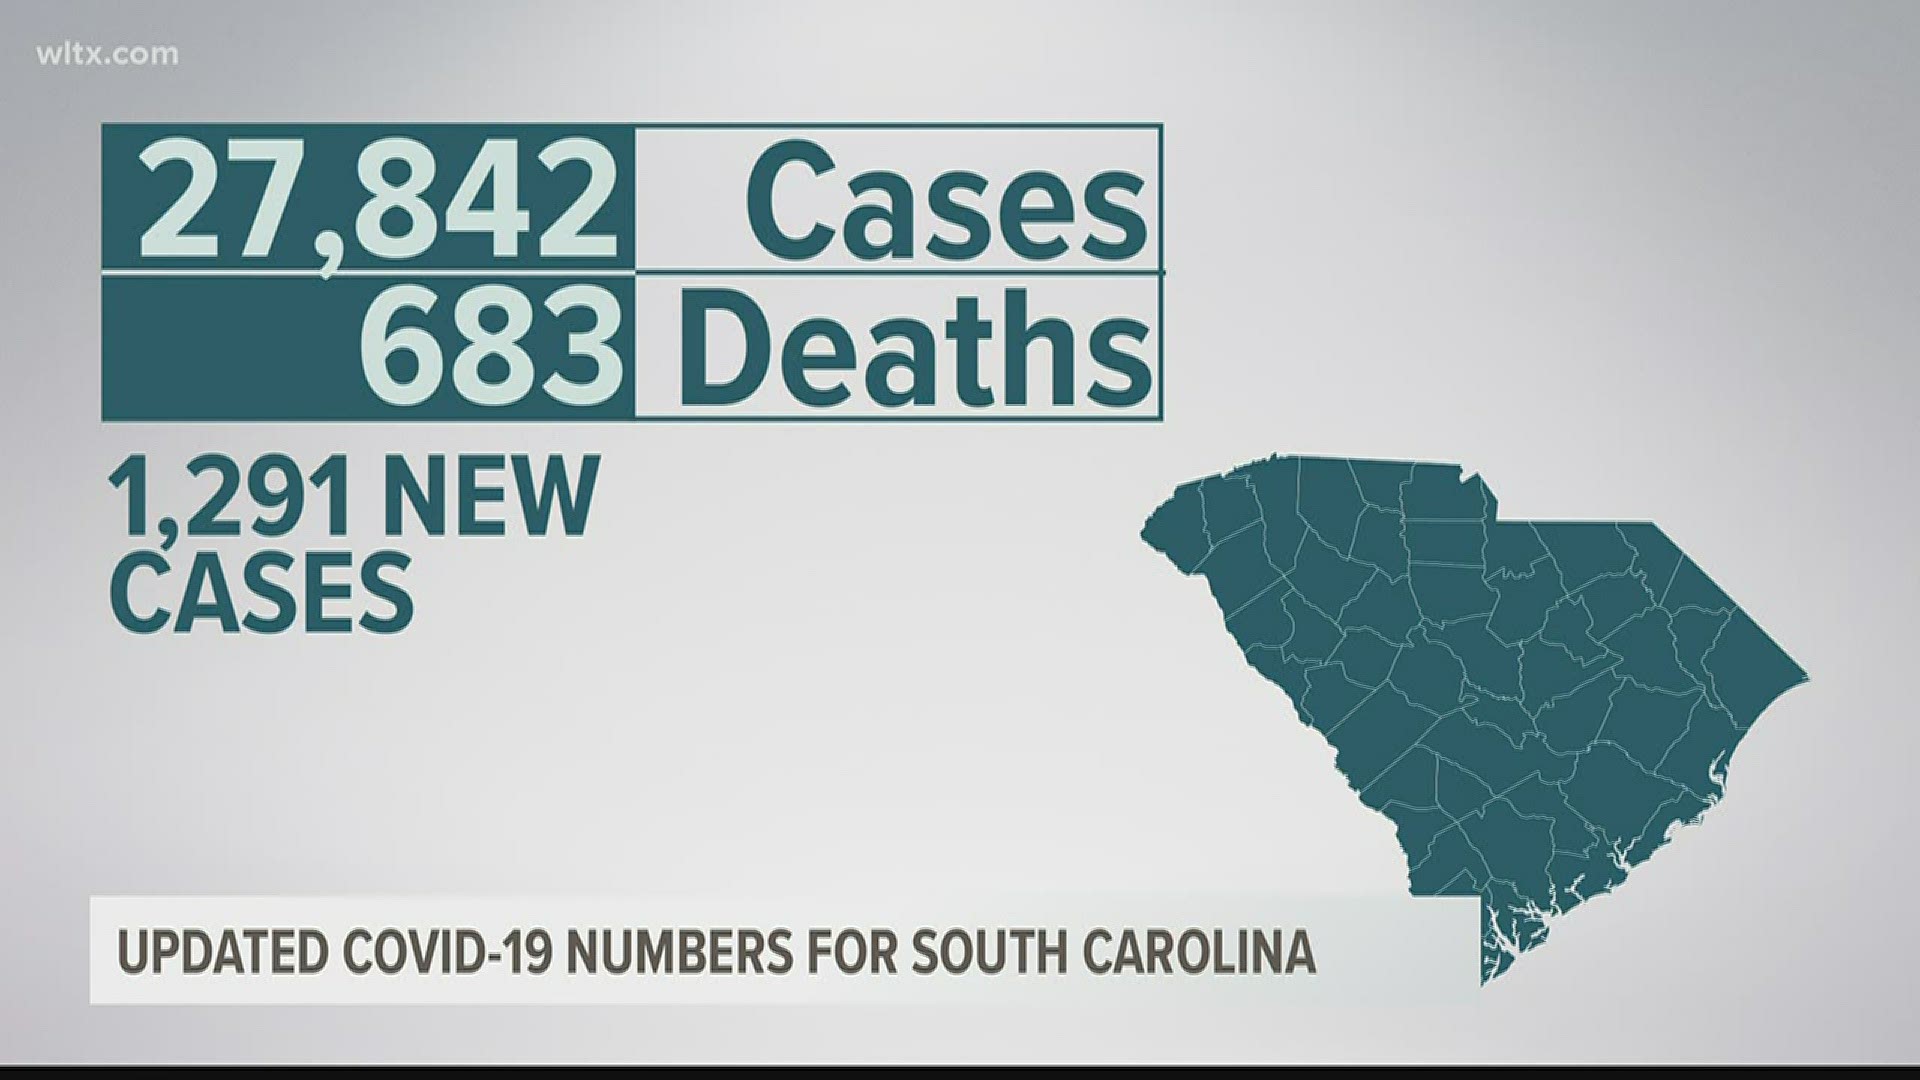 This brings the total number of people confirmed cases to 27,842, probable cases to 55, confirmed deaths to 683, and zero probable deaths.